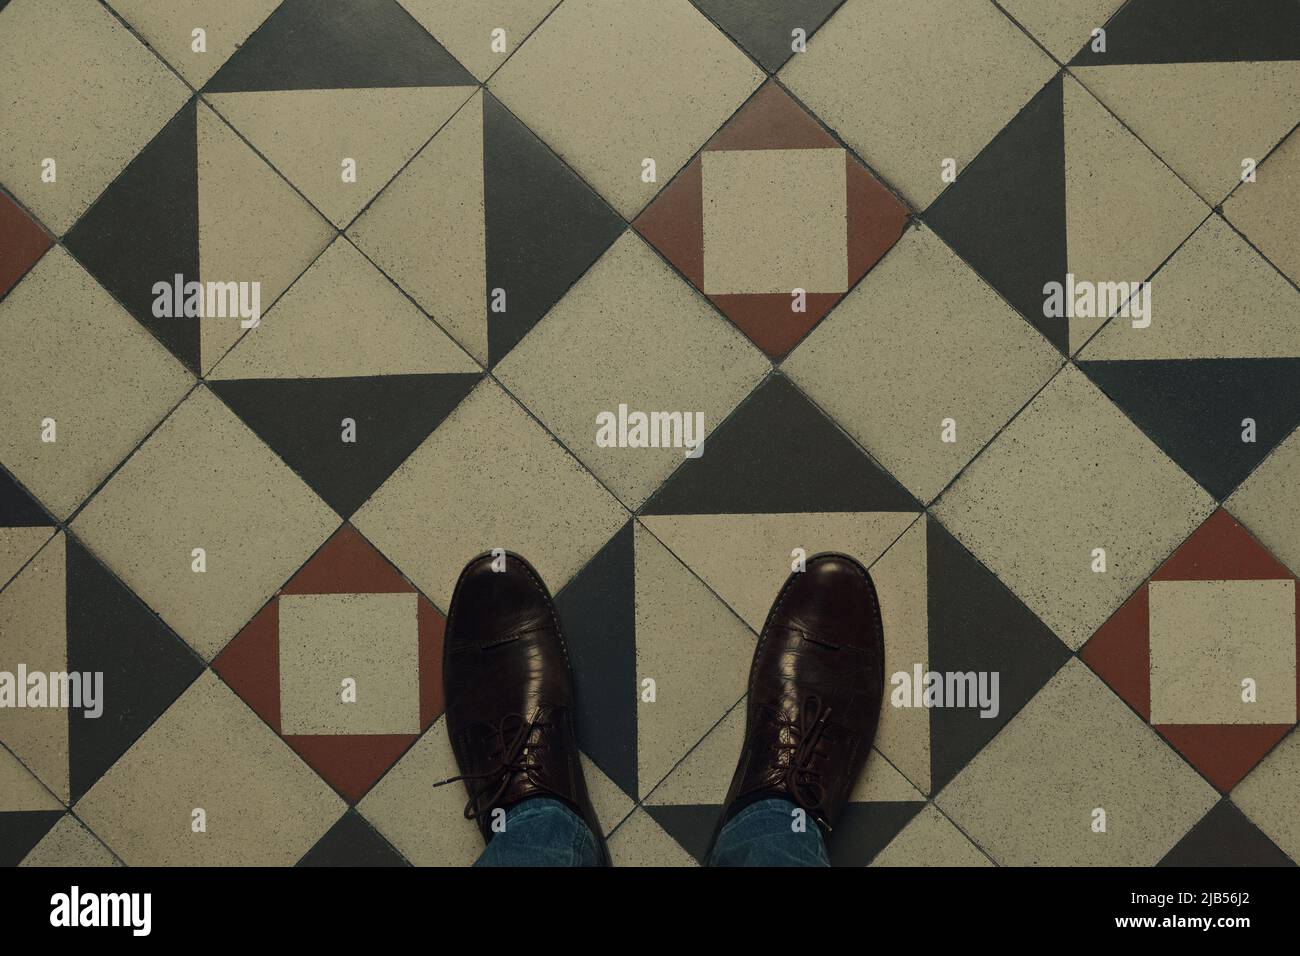 Standing on decorative hall floor, view from above on floor design and male shoes. Stock Photo